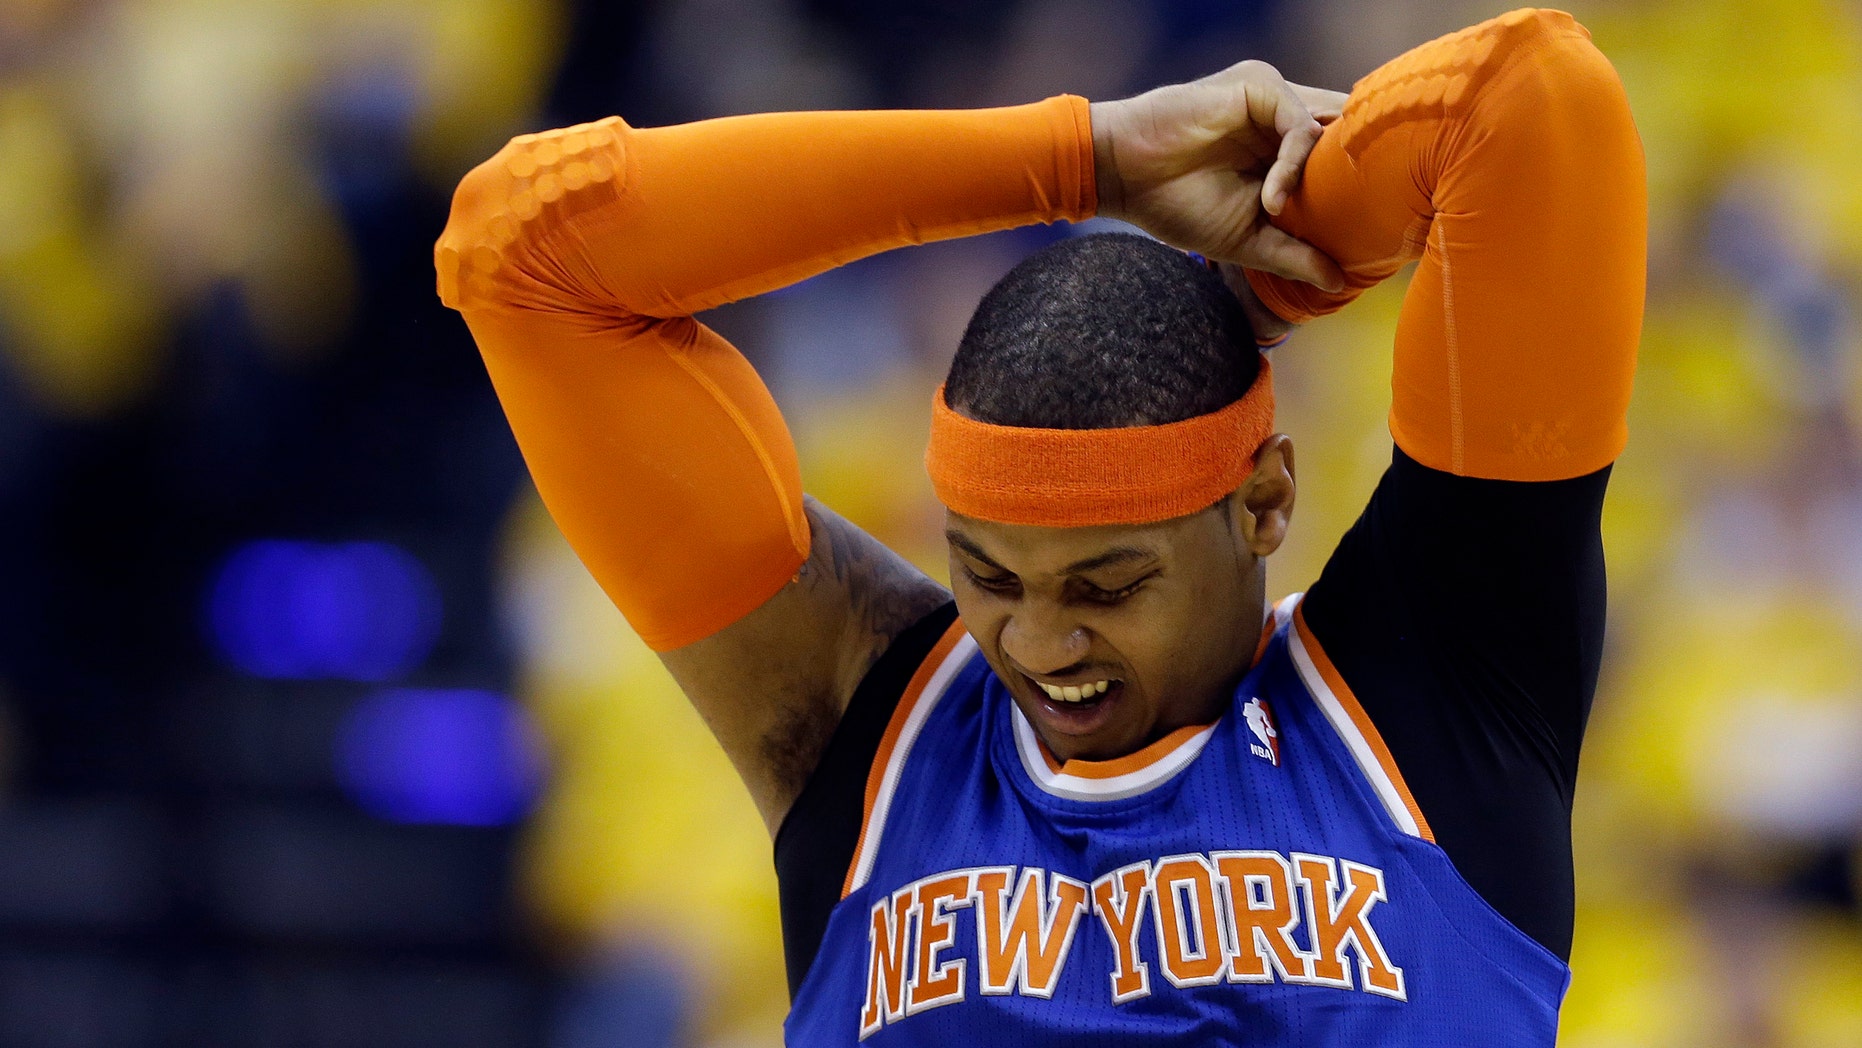 New York Knicks & Carmelo Anthony Could Let Pacers Take Control Fox News